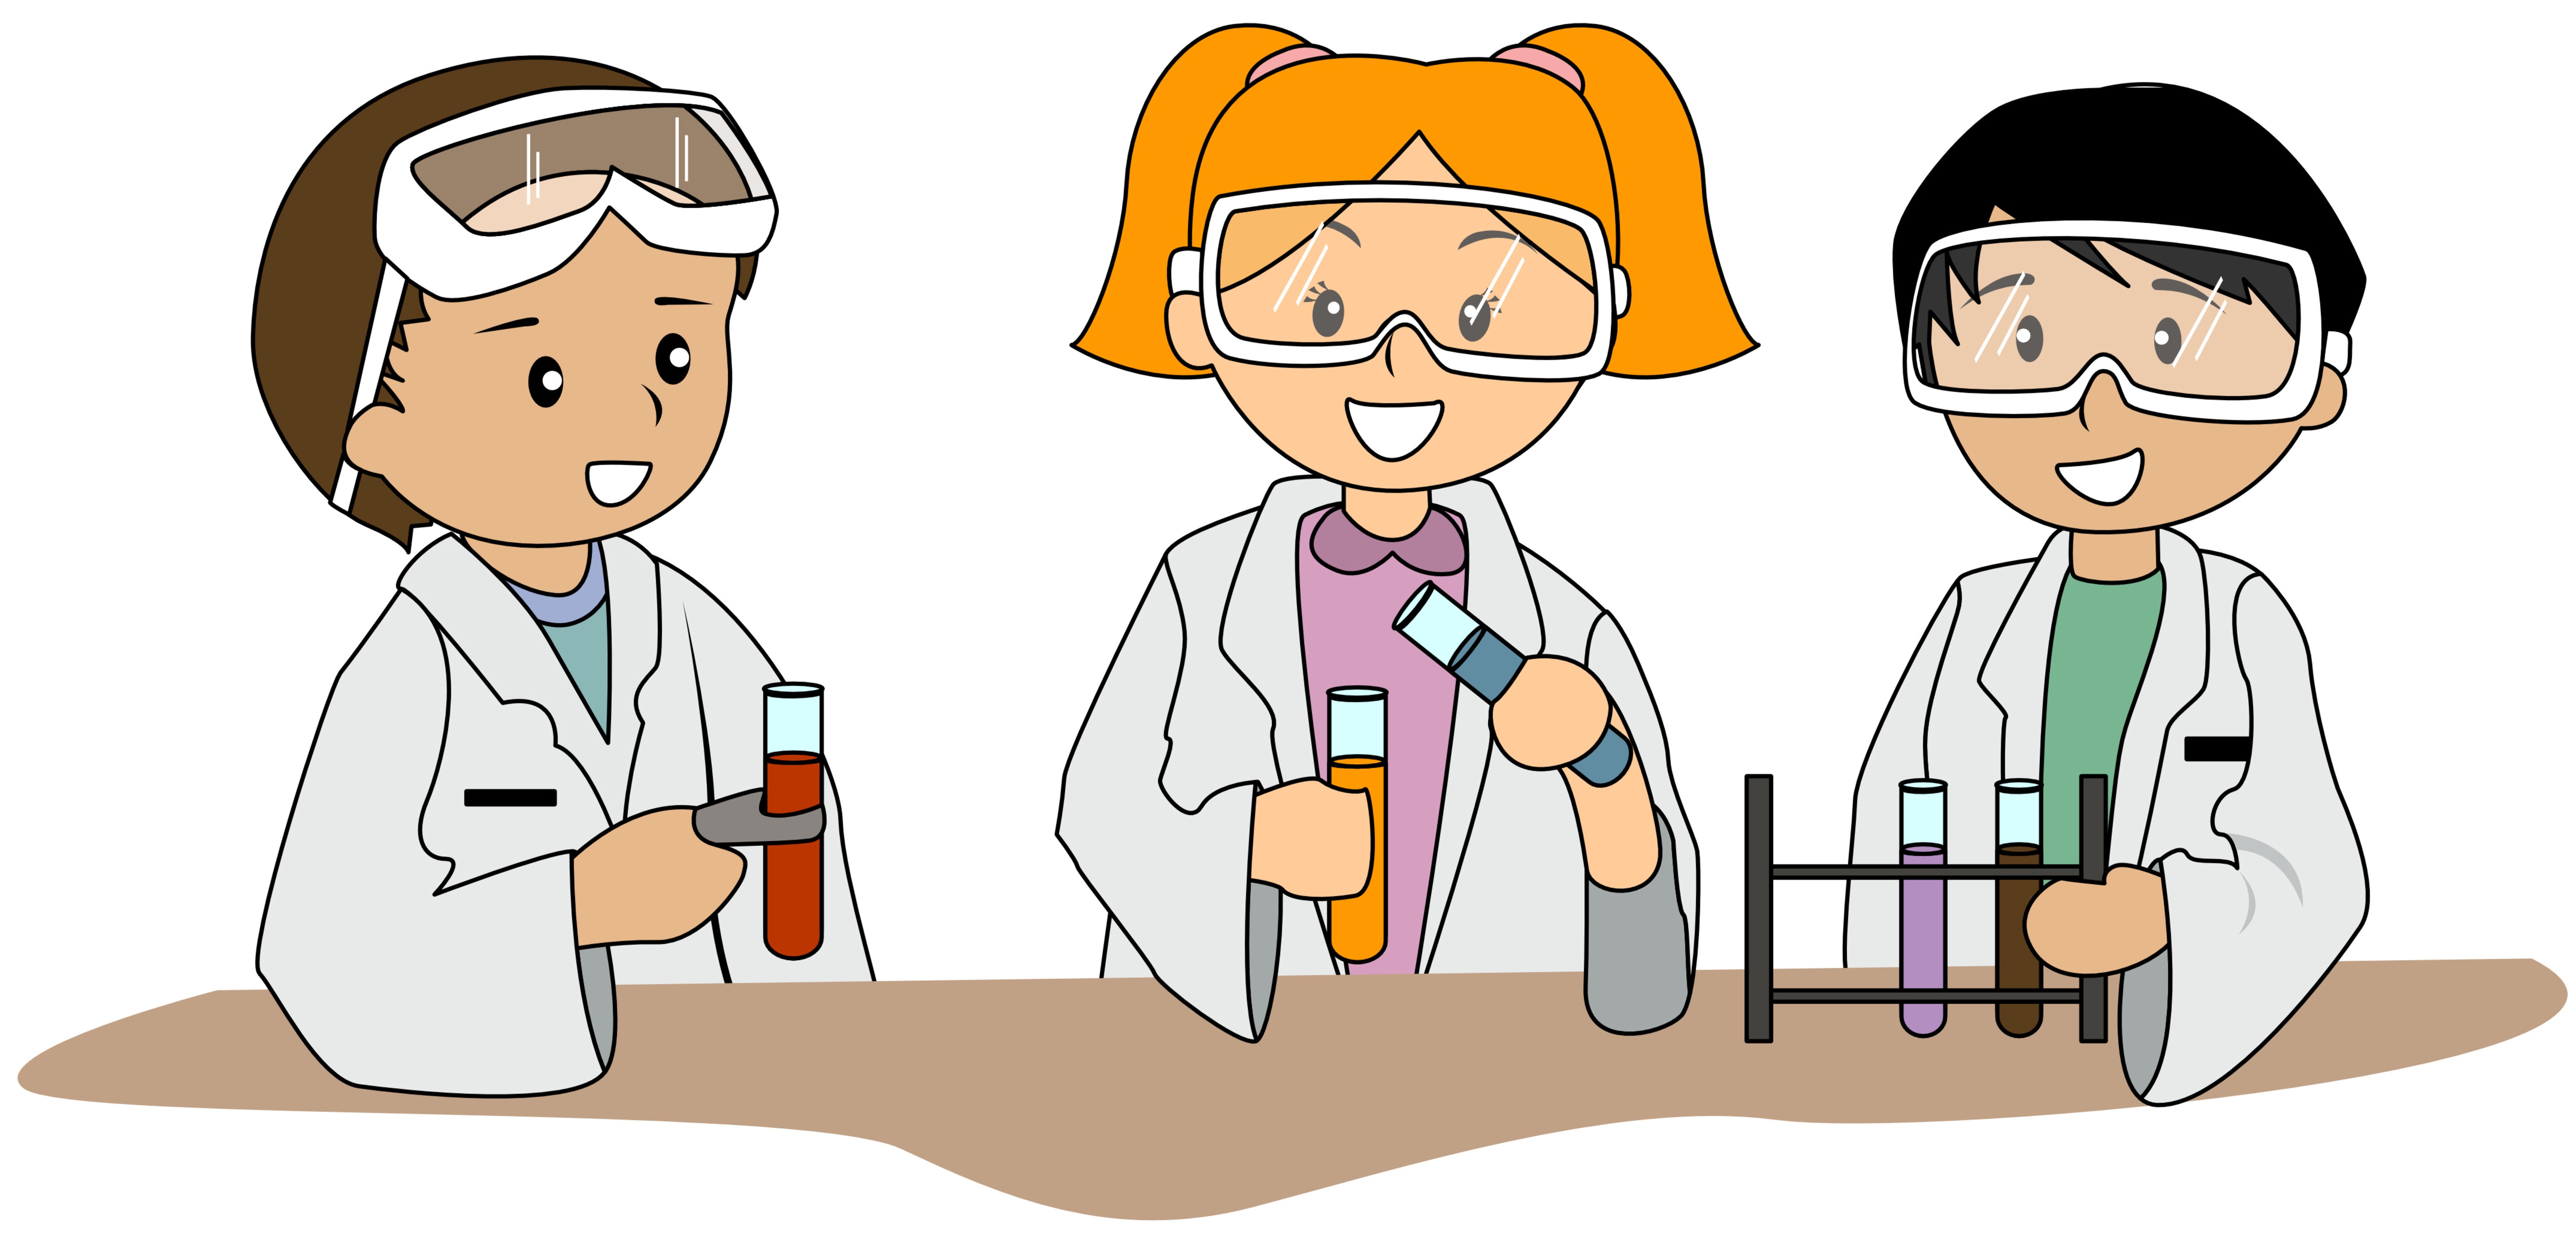 Picture #2889145 - lab clipart science classroom. lab clipart science class...